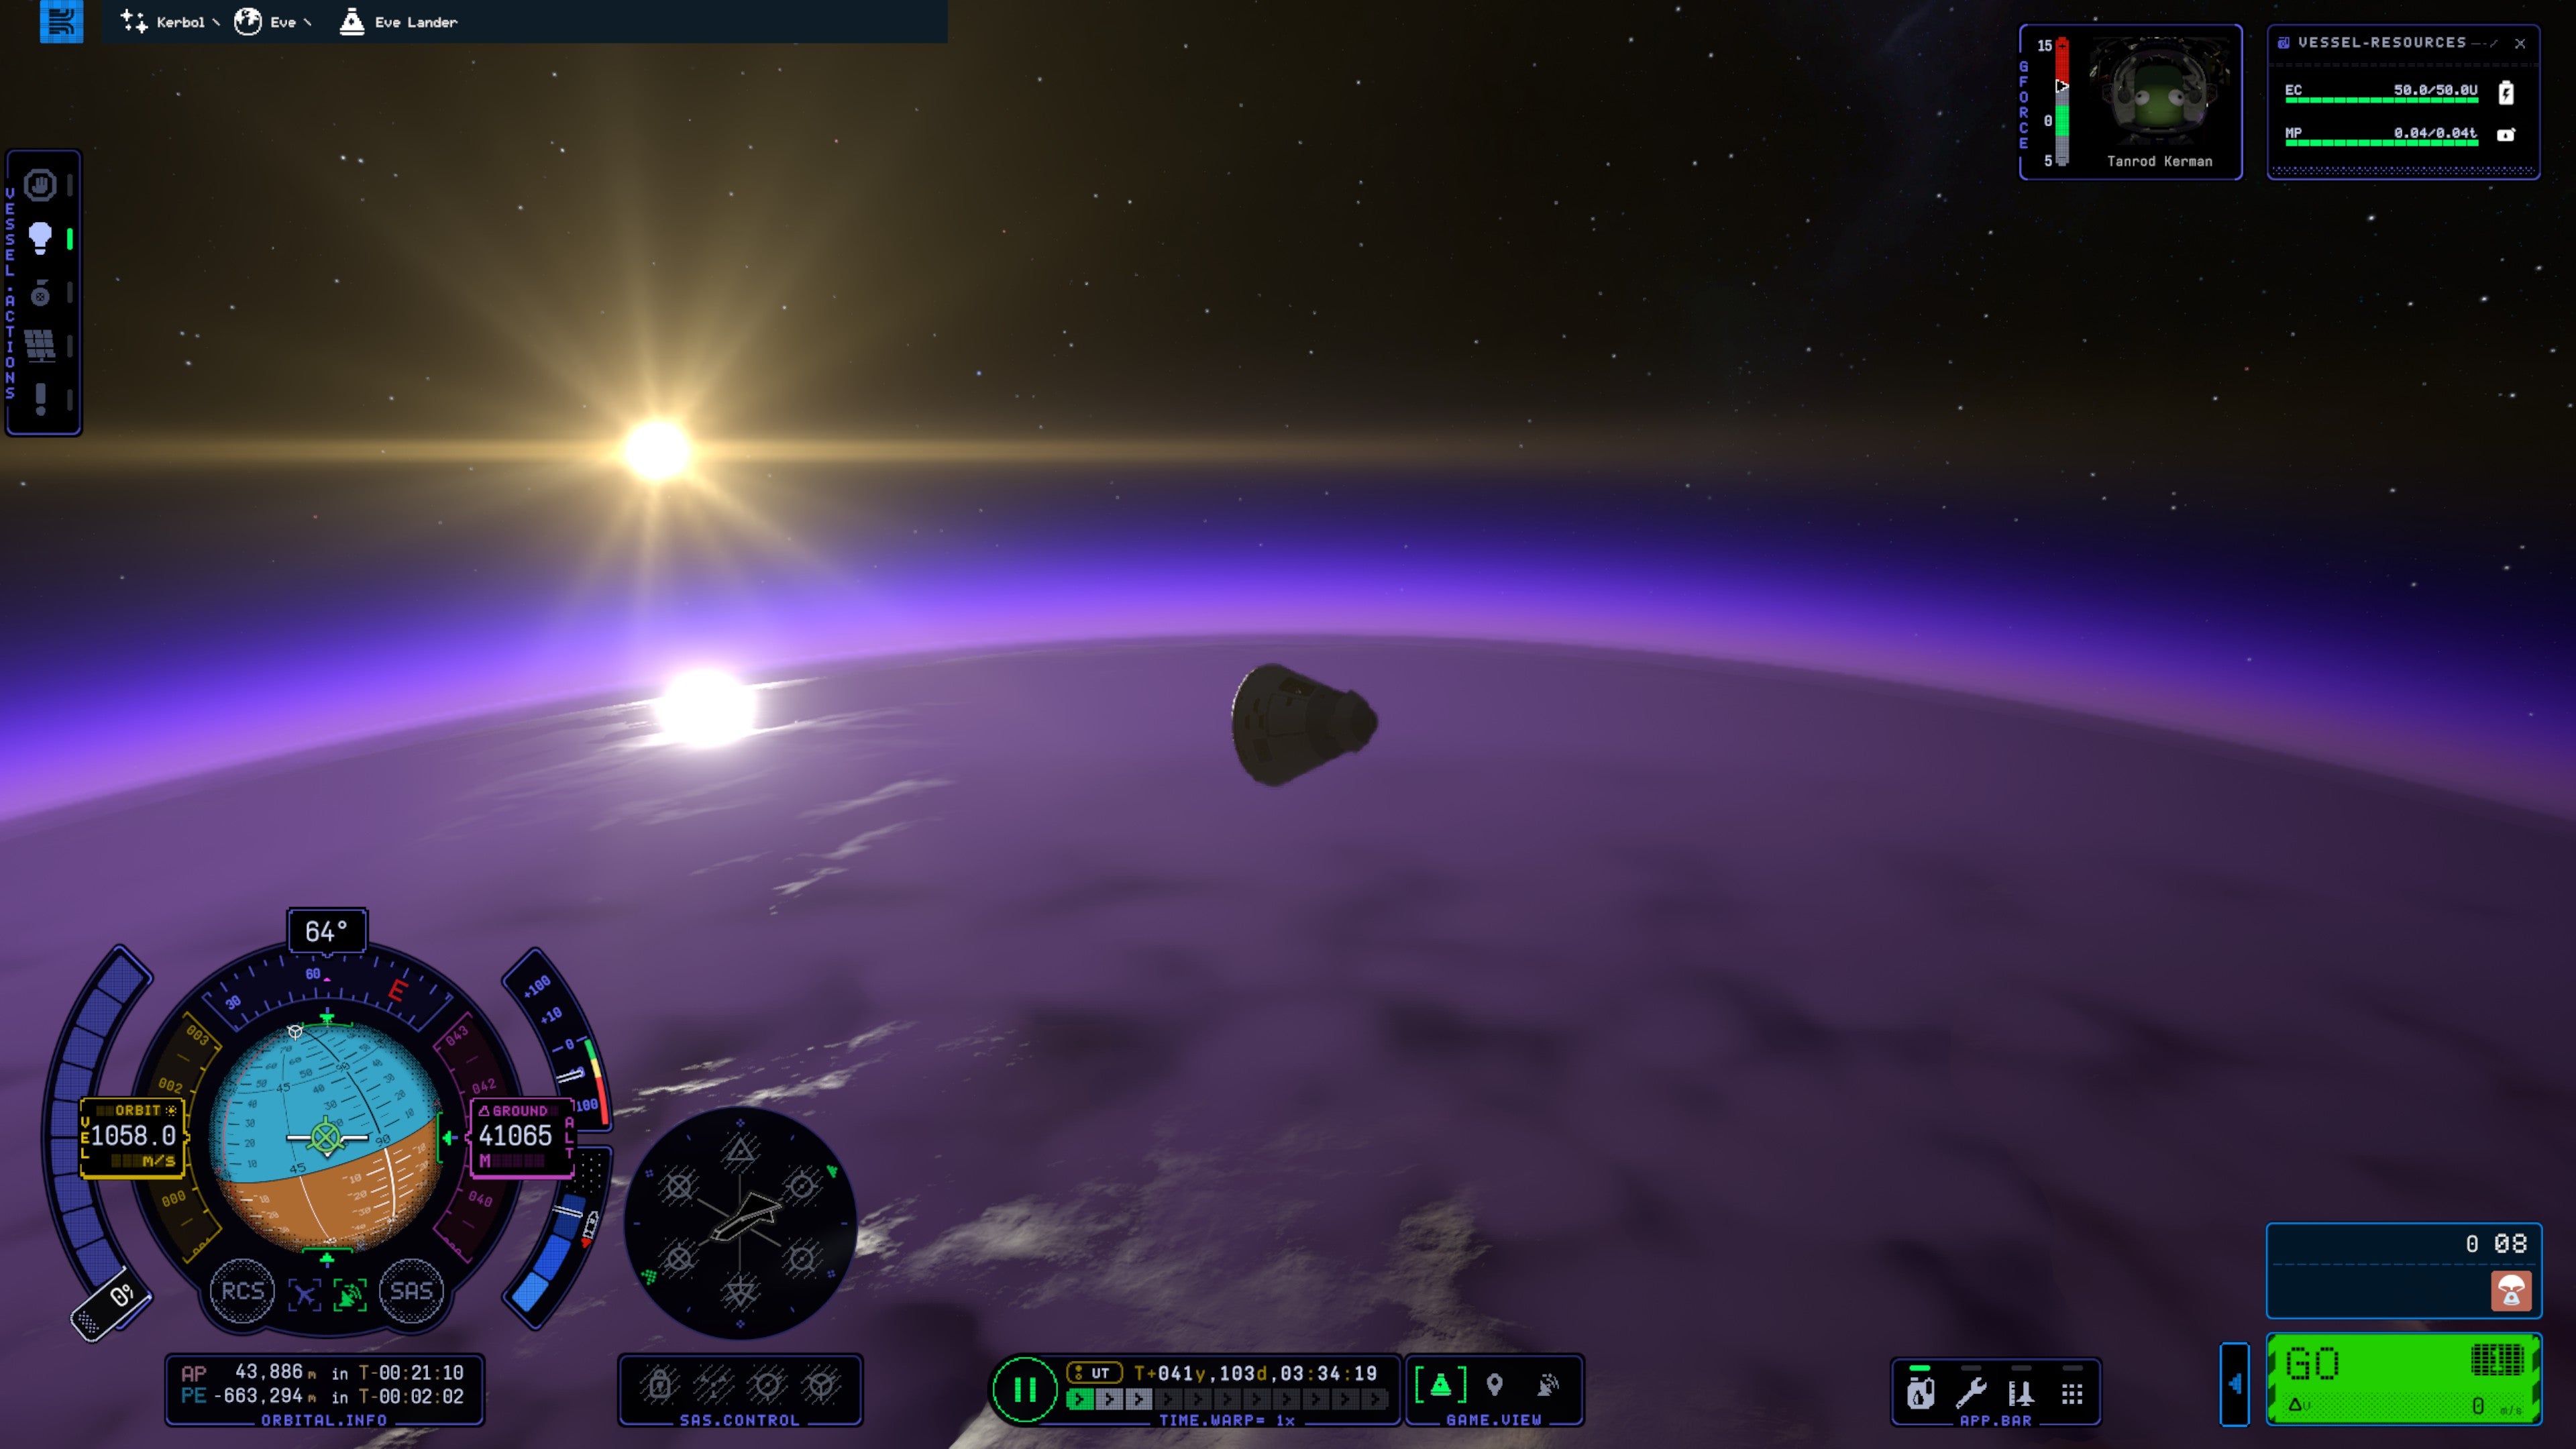 Screenshot of Kerbal Space Program 2 showing a small shuttle in space